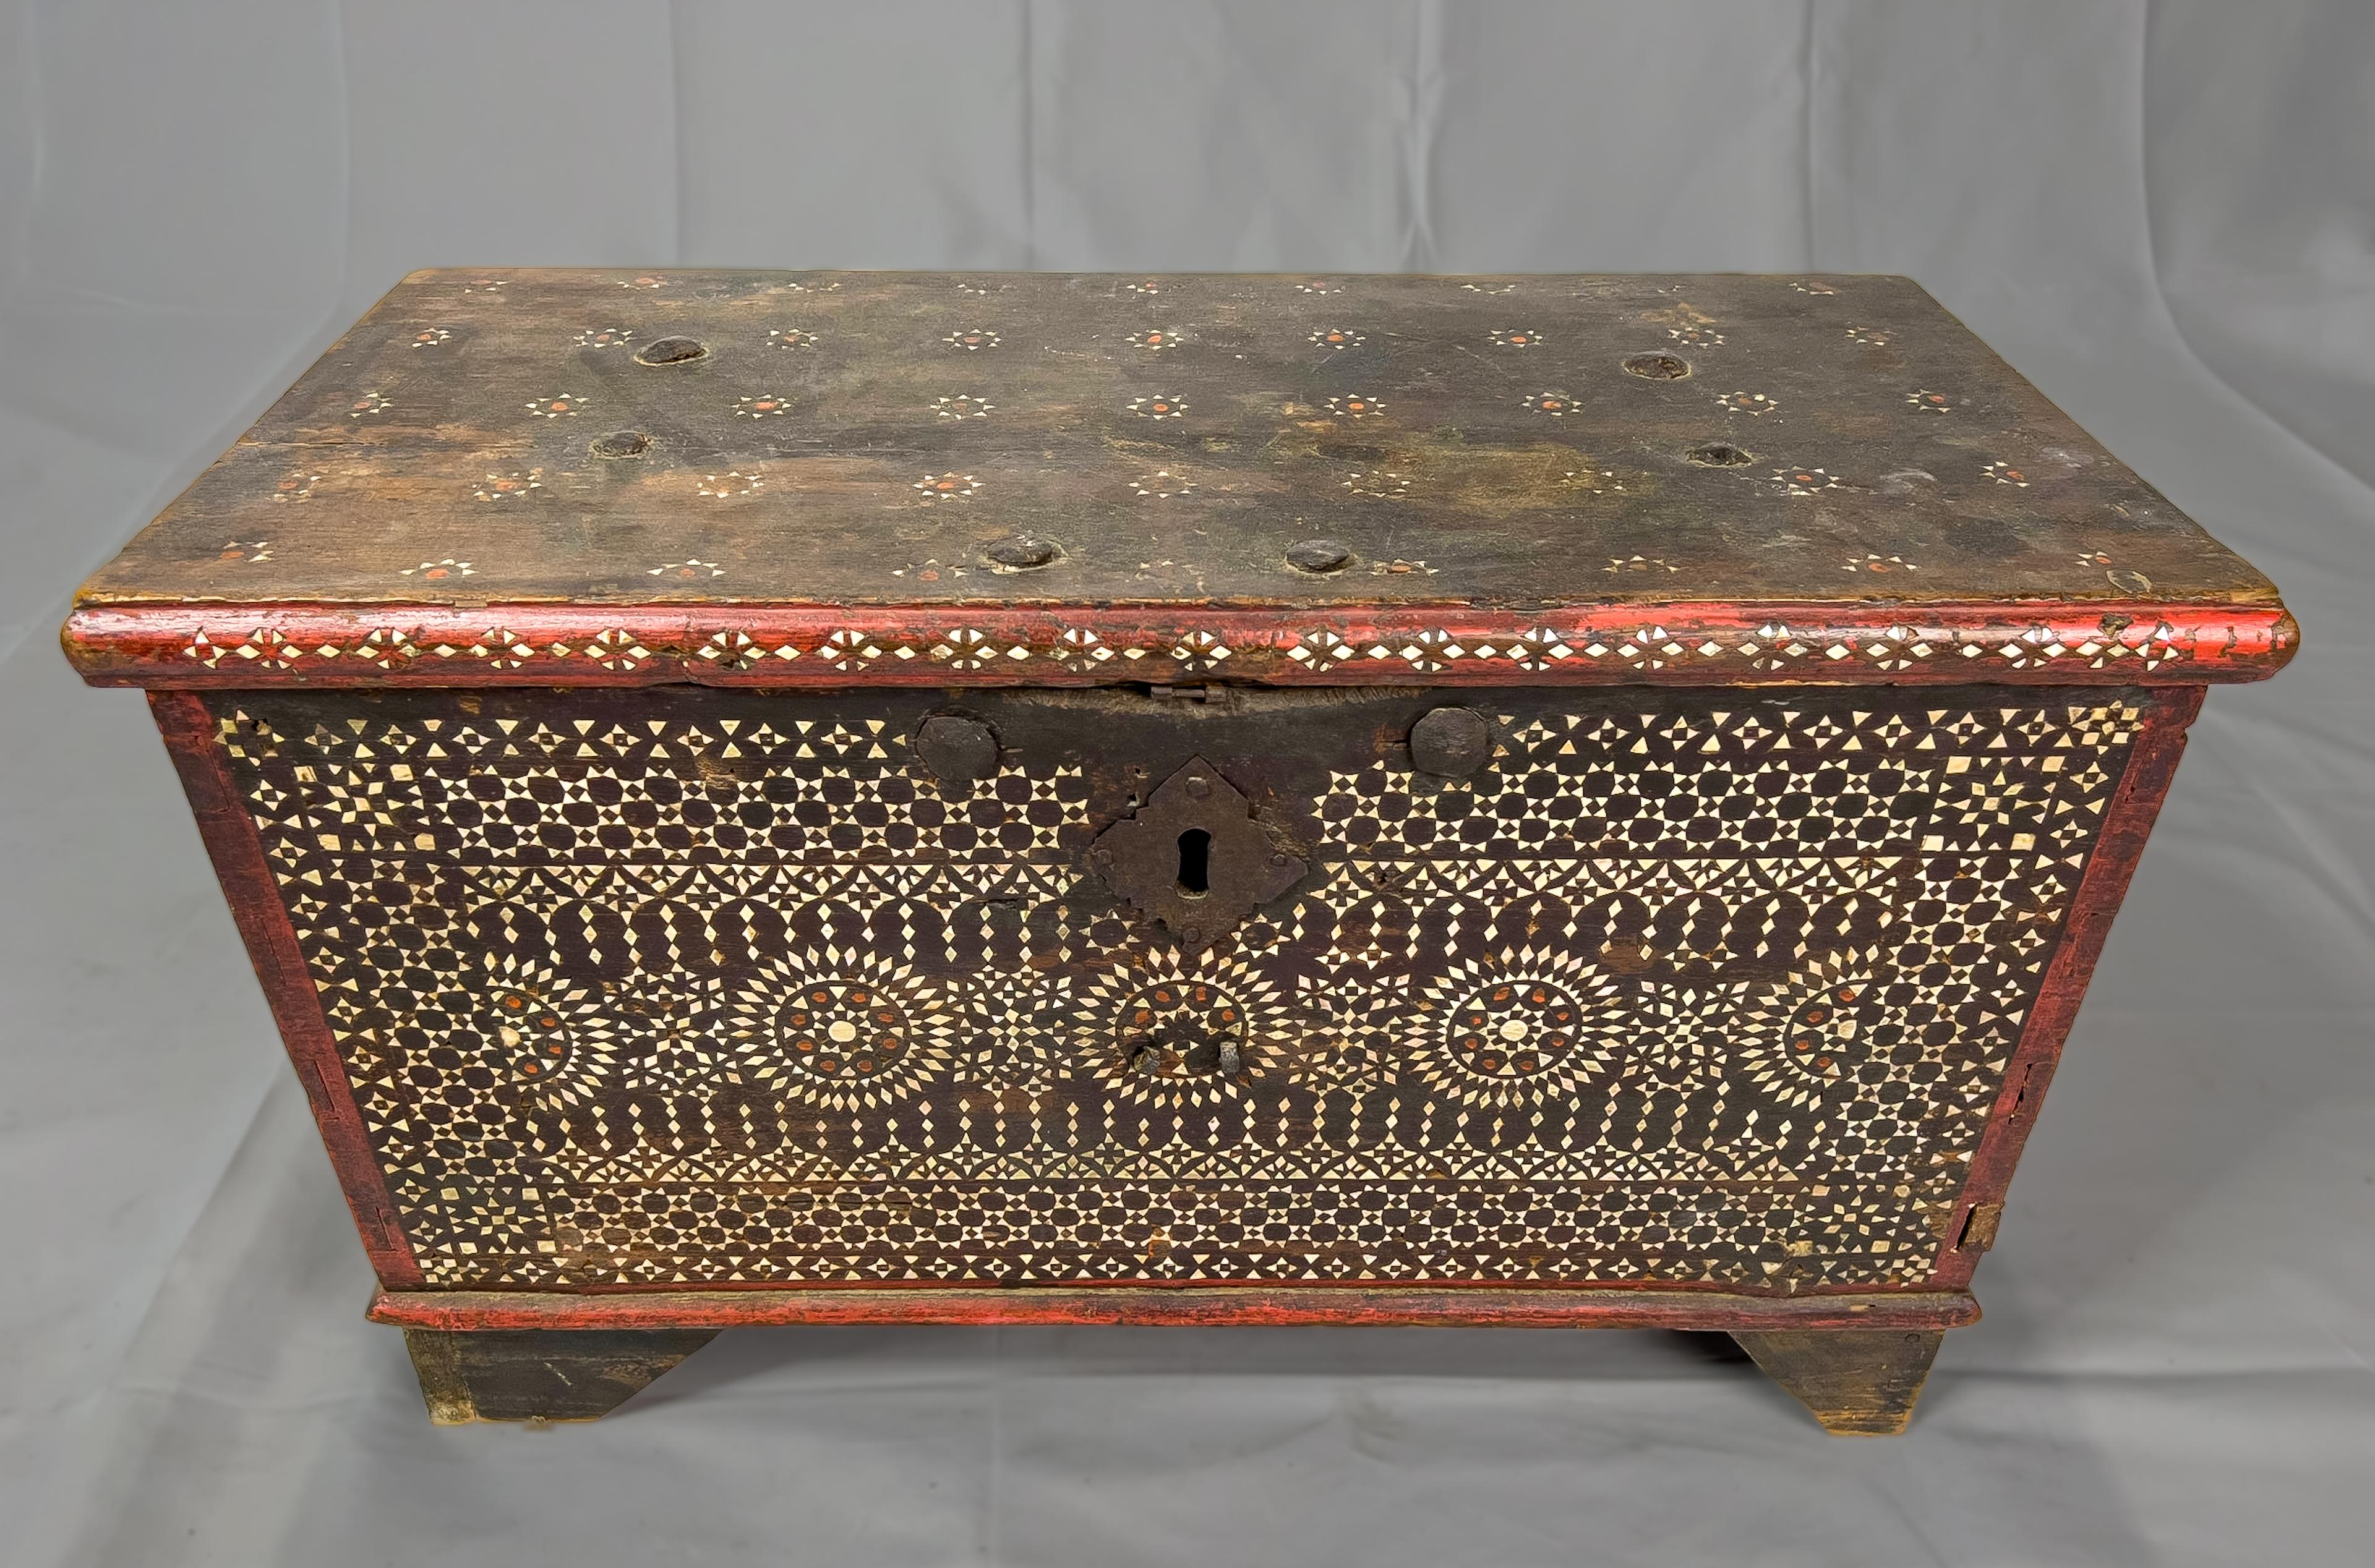 20th century Indonesian wooden blanket chest with Mother of Pearl Inlay. (The lid is no longer attached to the chest).